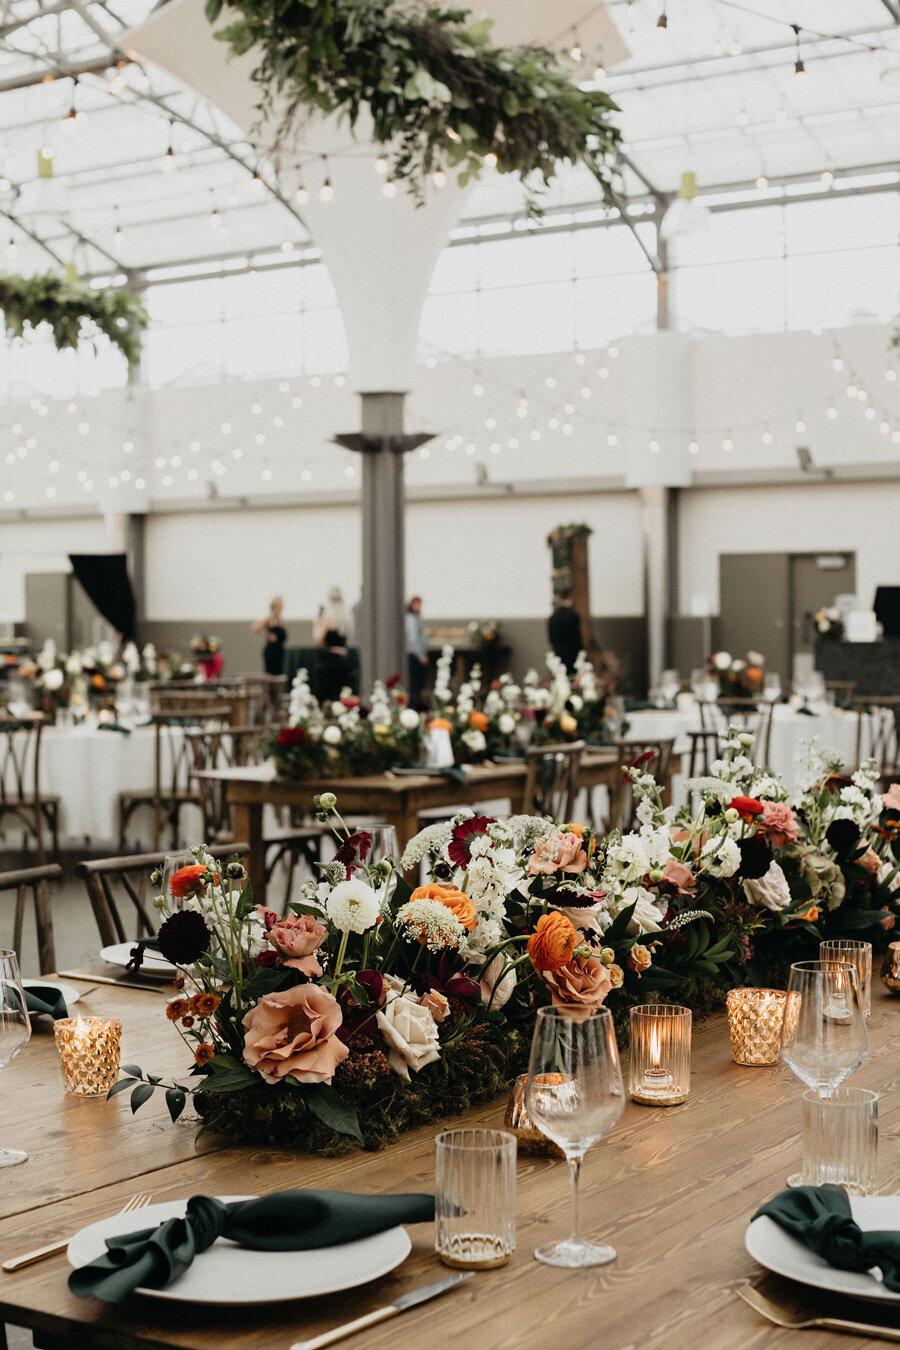 Wedding reception table decor with rich jewel tones and vintage vibes.